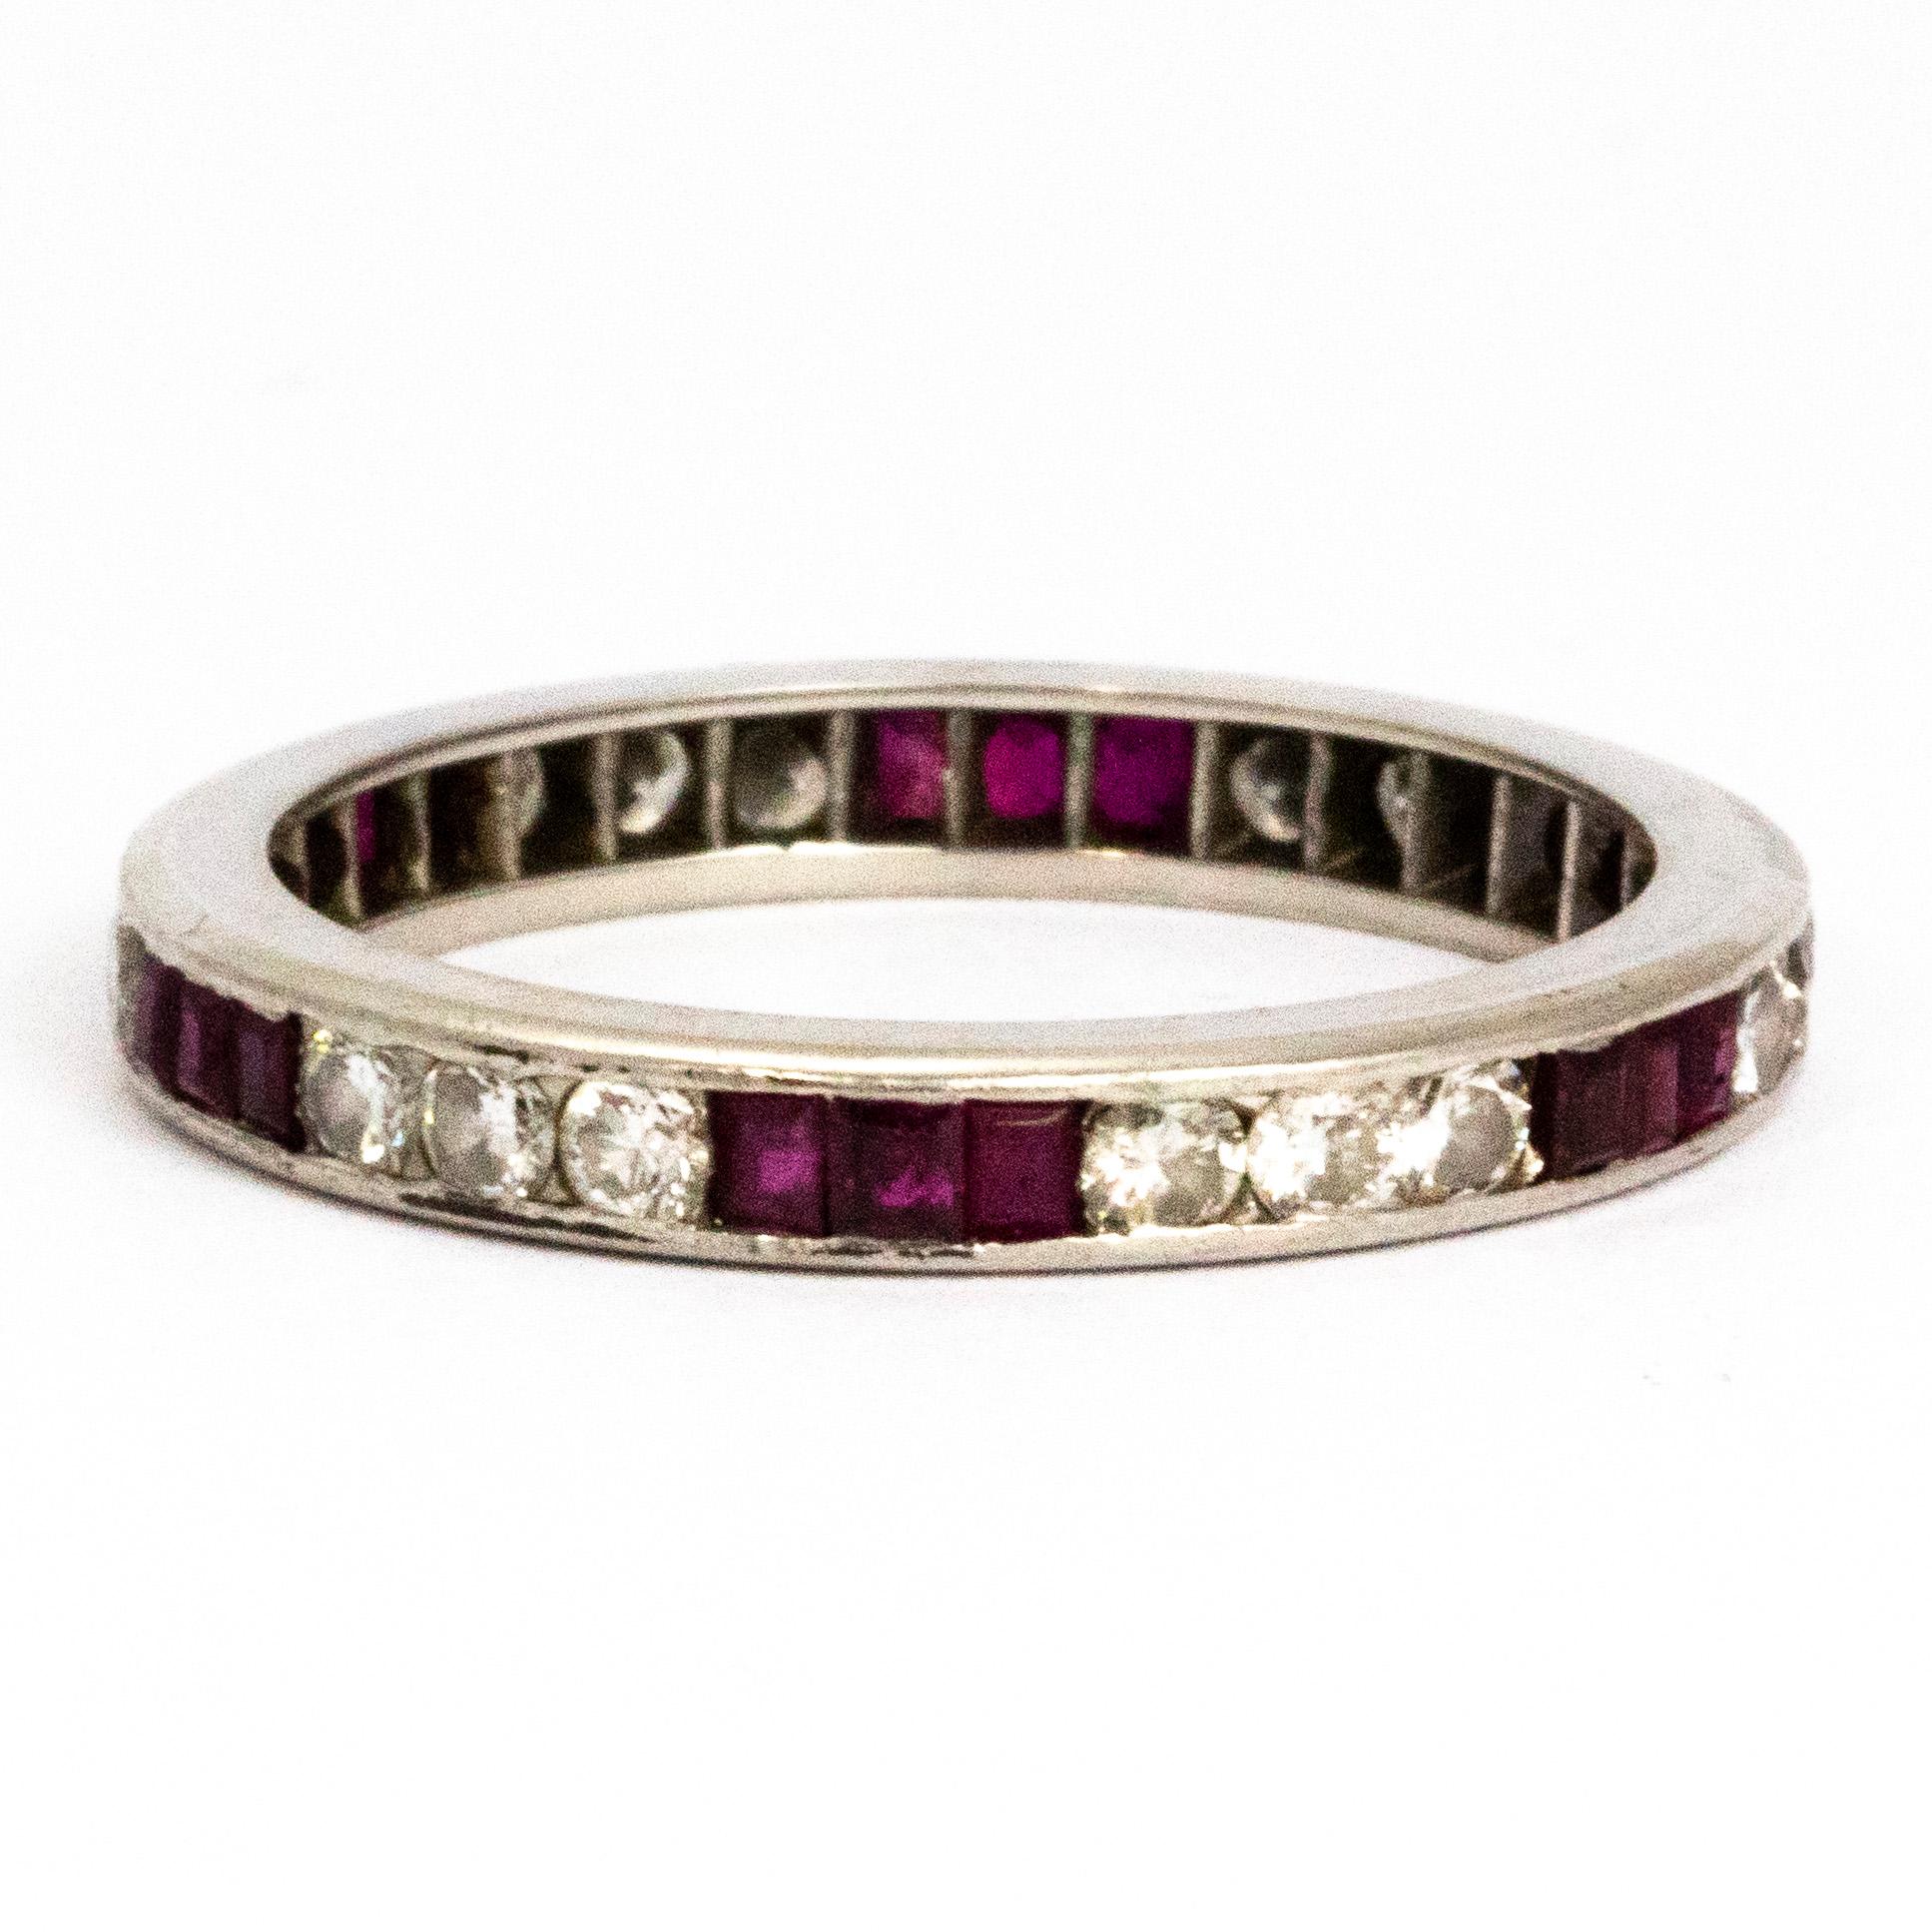 The gorgeous round cut diamonds measuring 5pts in this ring are perfectly complemented by the 10pt step cut rubies. The different colour and cut of stones make a really striking pattern on this full eternity band. 

Ring Size: R 1/2 or 8 3/4 